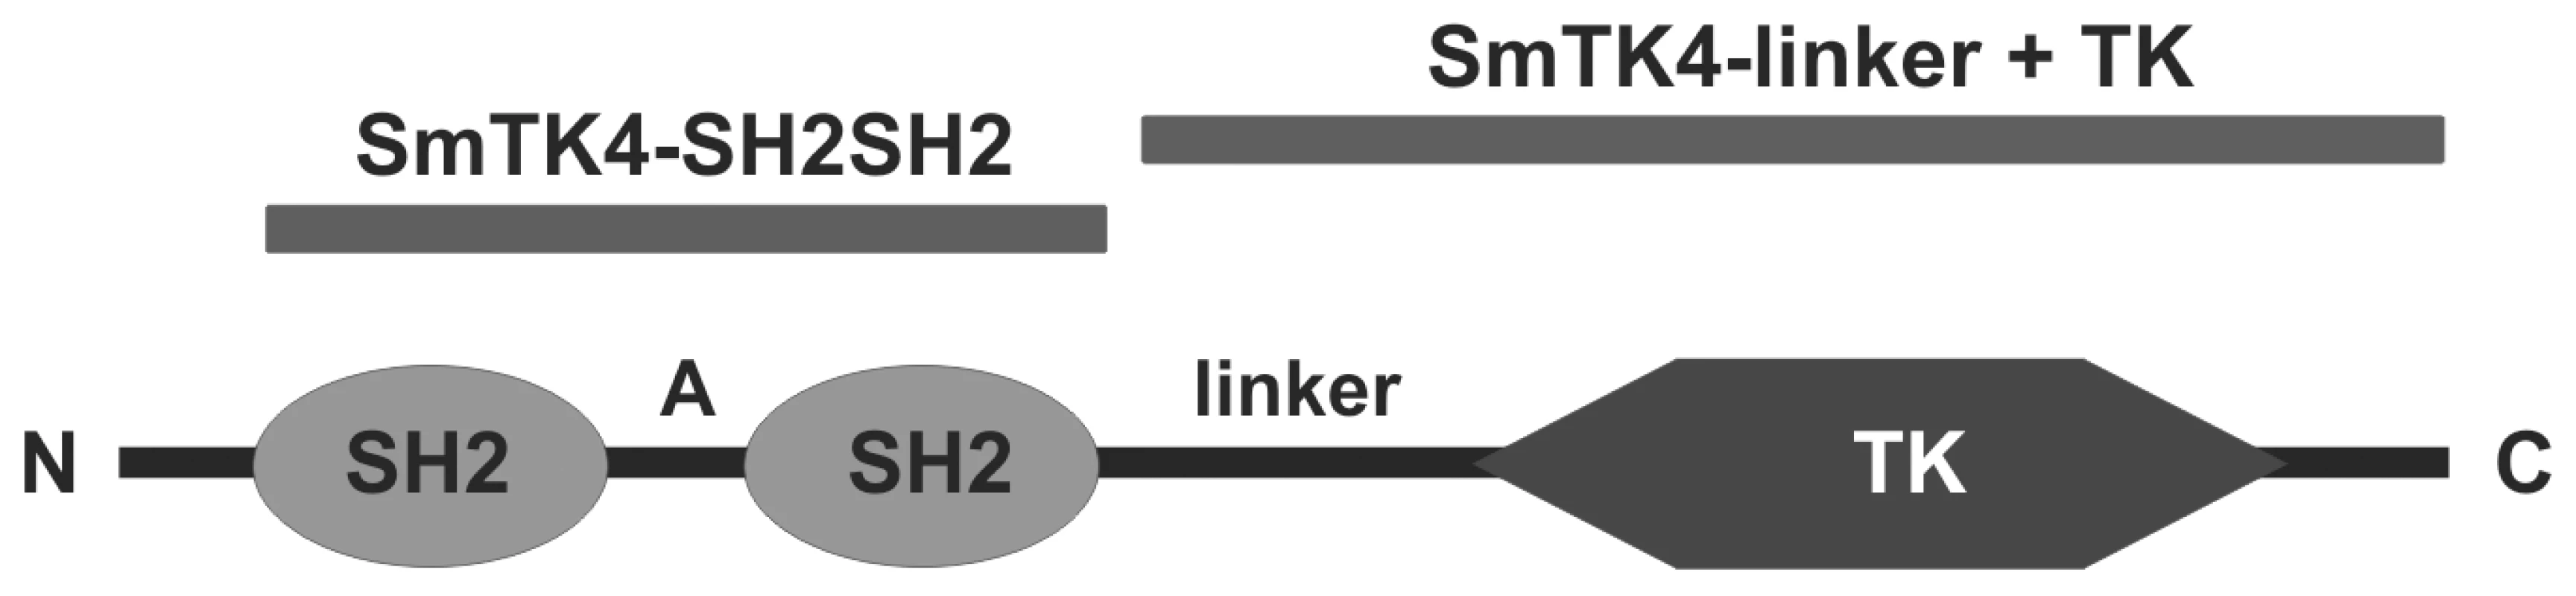 Domain structure of SmTK4.